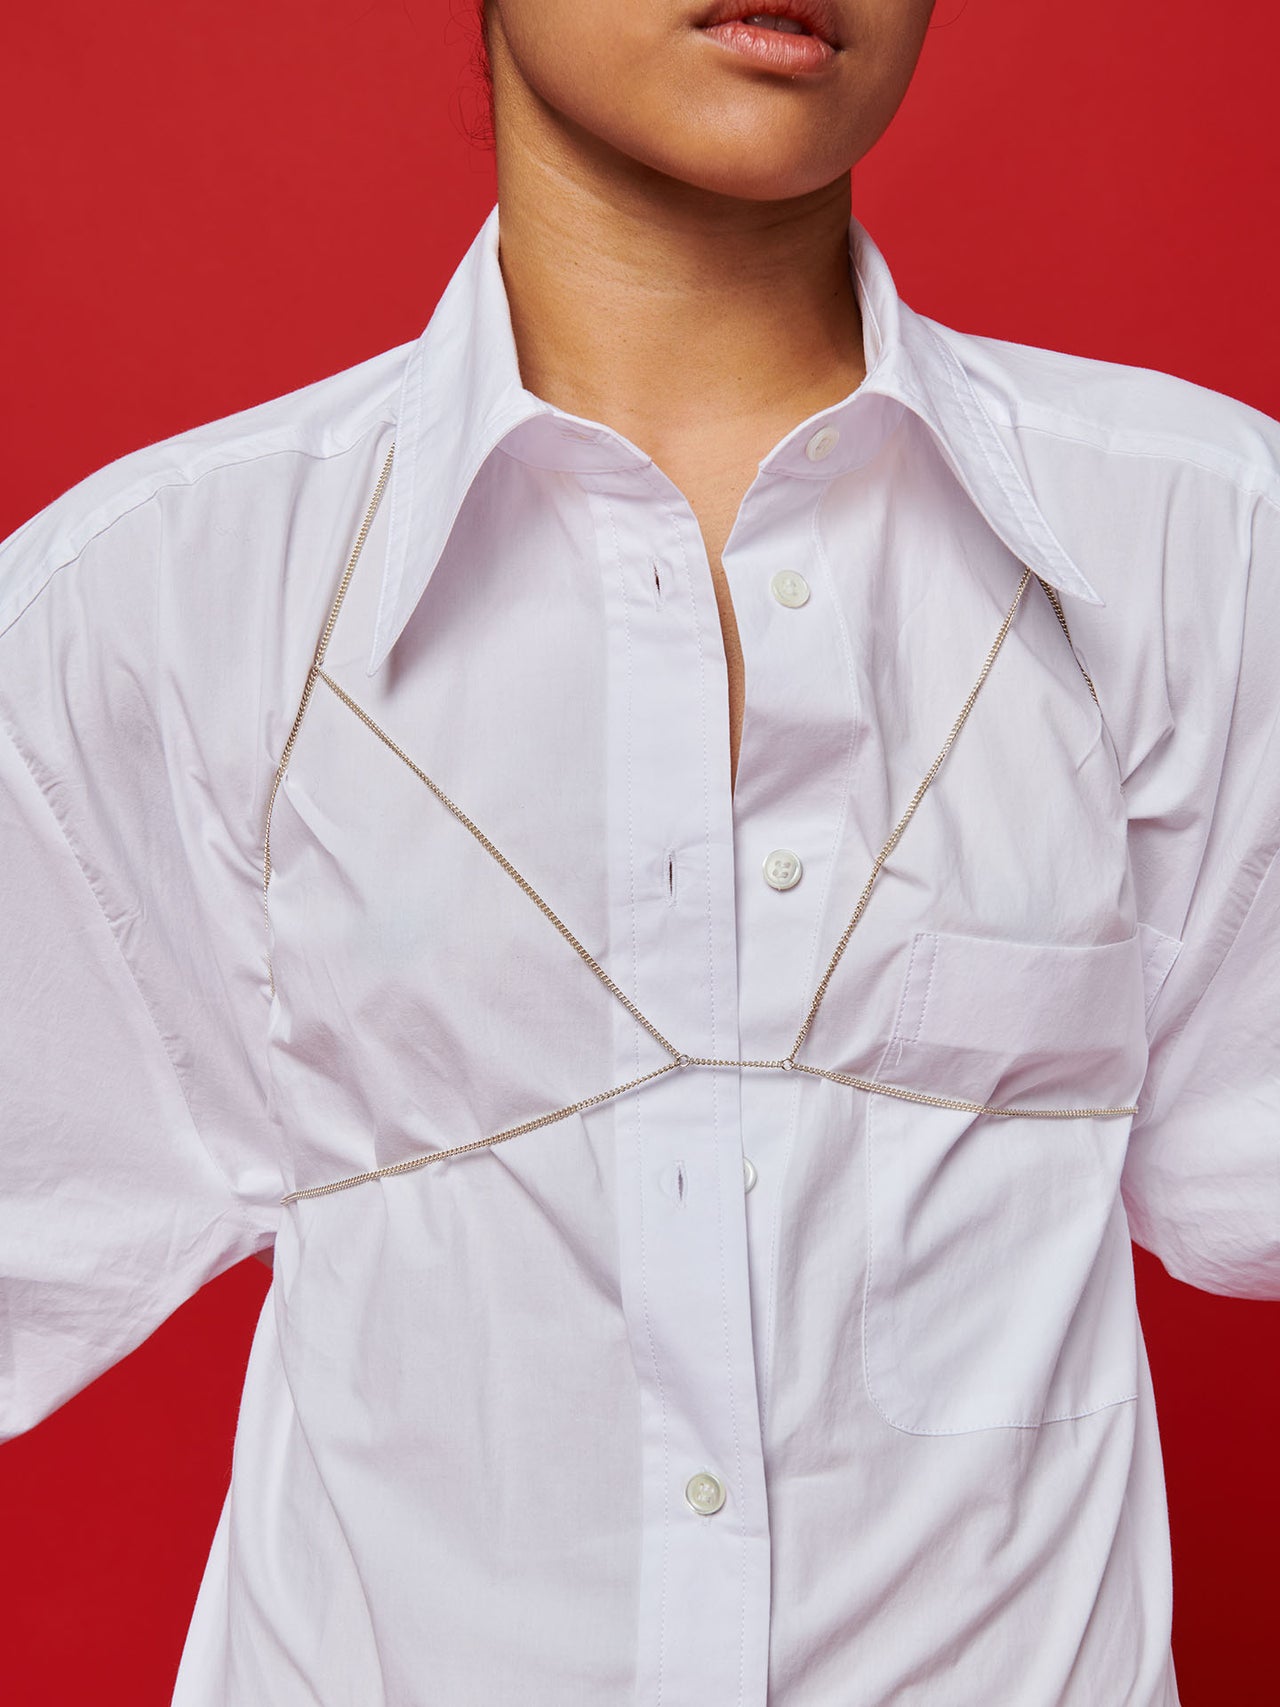 Sterling Silver Body Chain pictured on model worn over white button down. red background. close up.